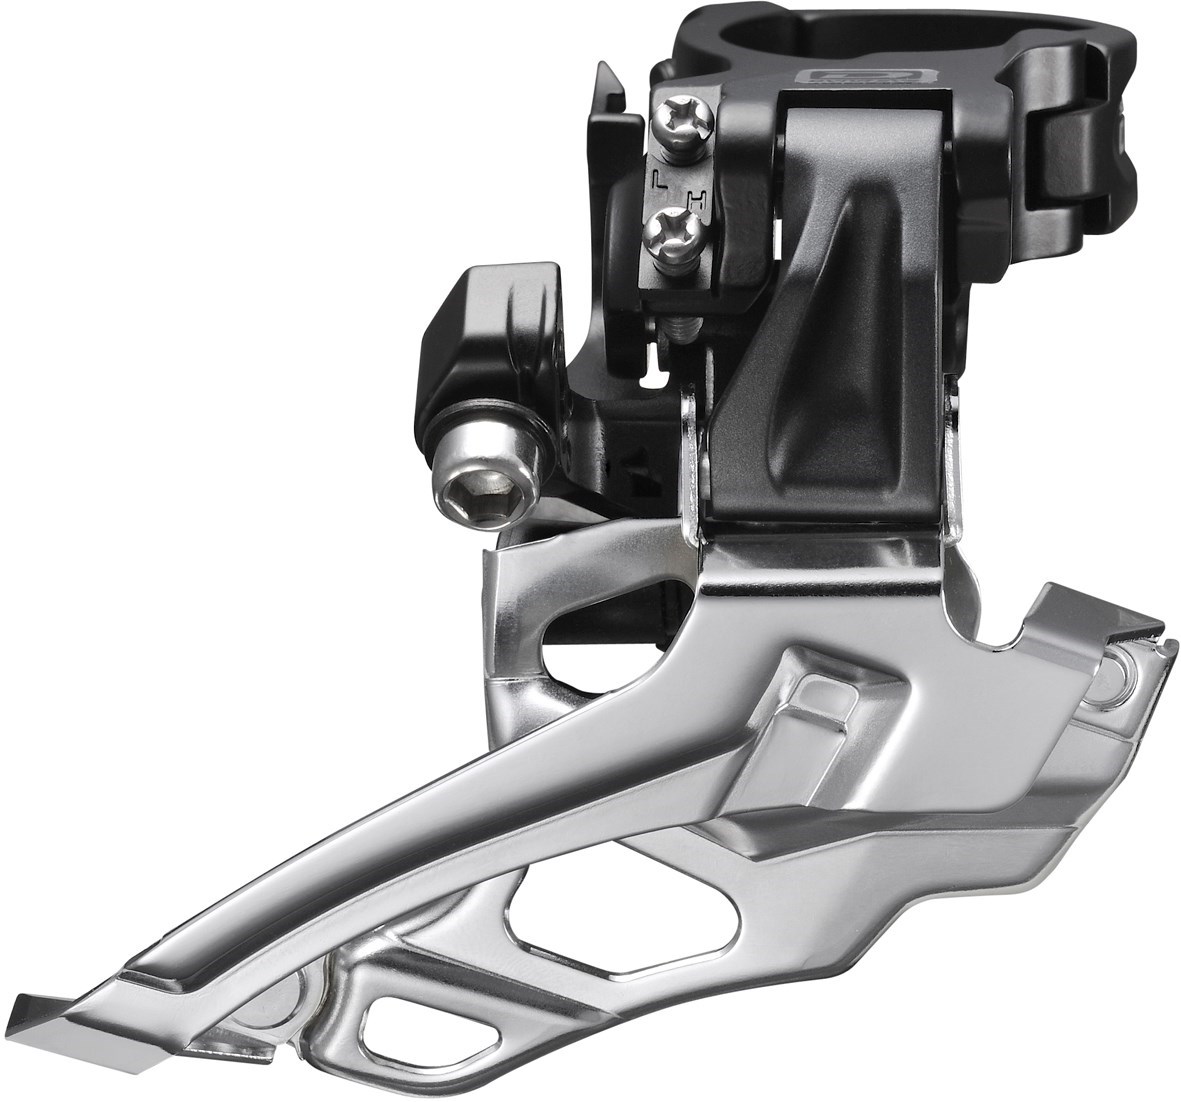 Shimano FD-M616 Deore 10-Speed Double Front Derailleur - Conventional Swing - Dual-Pull product image